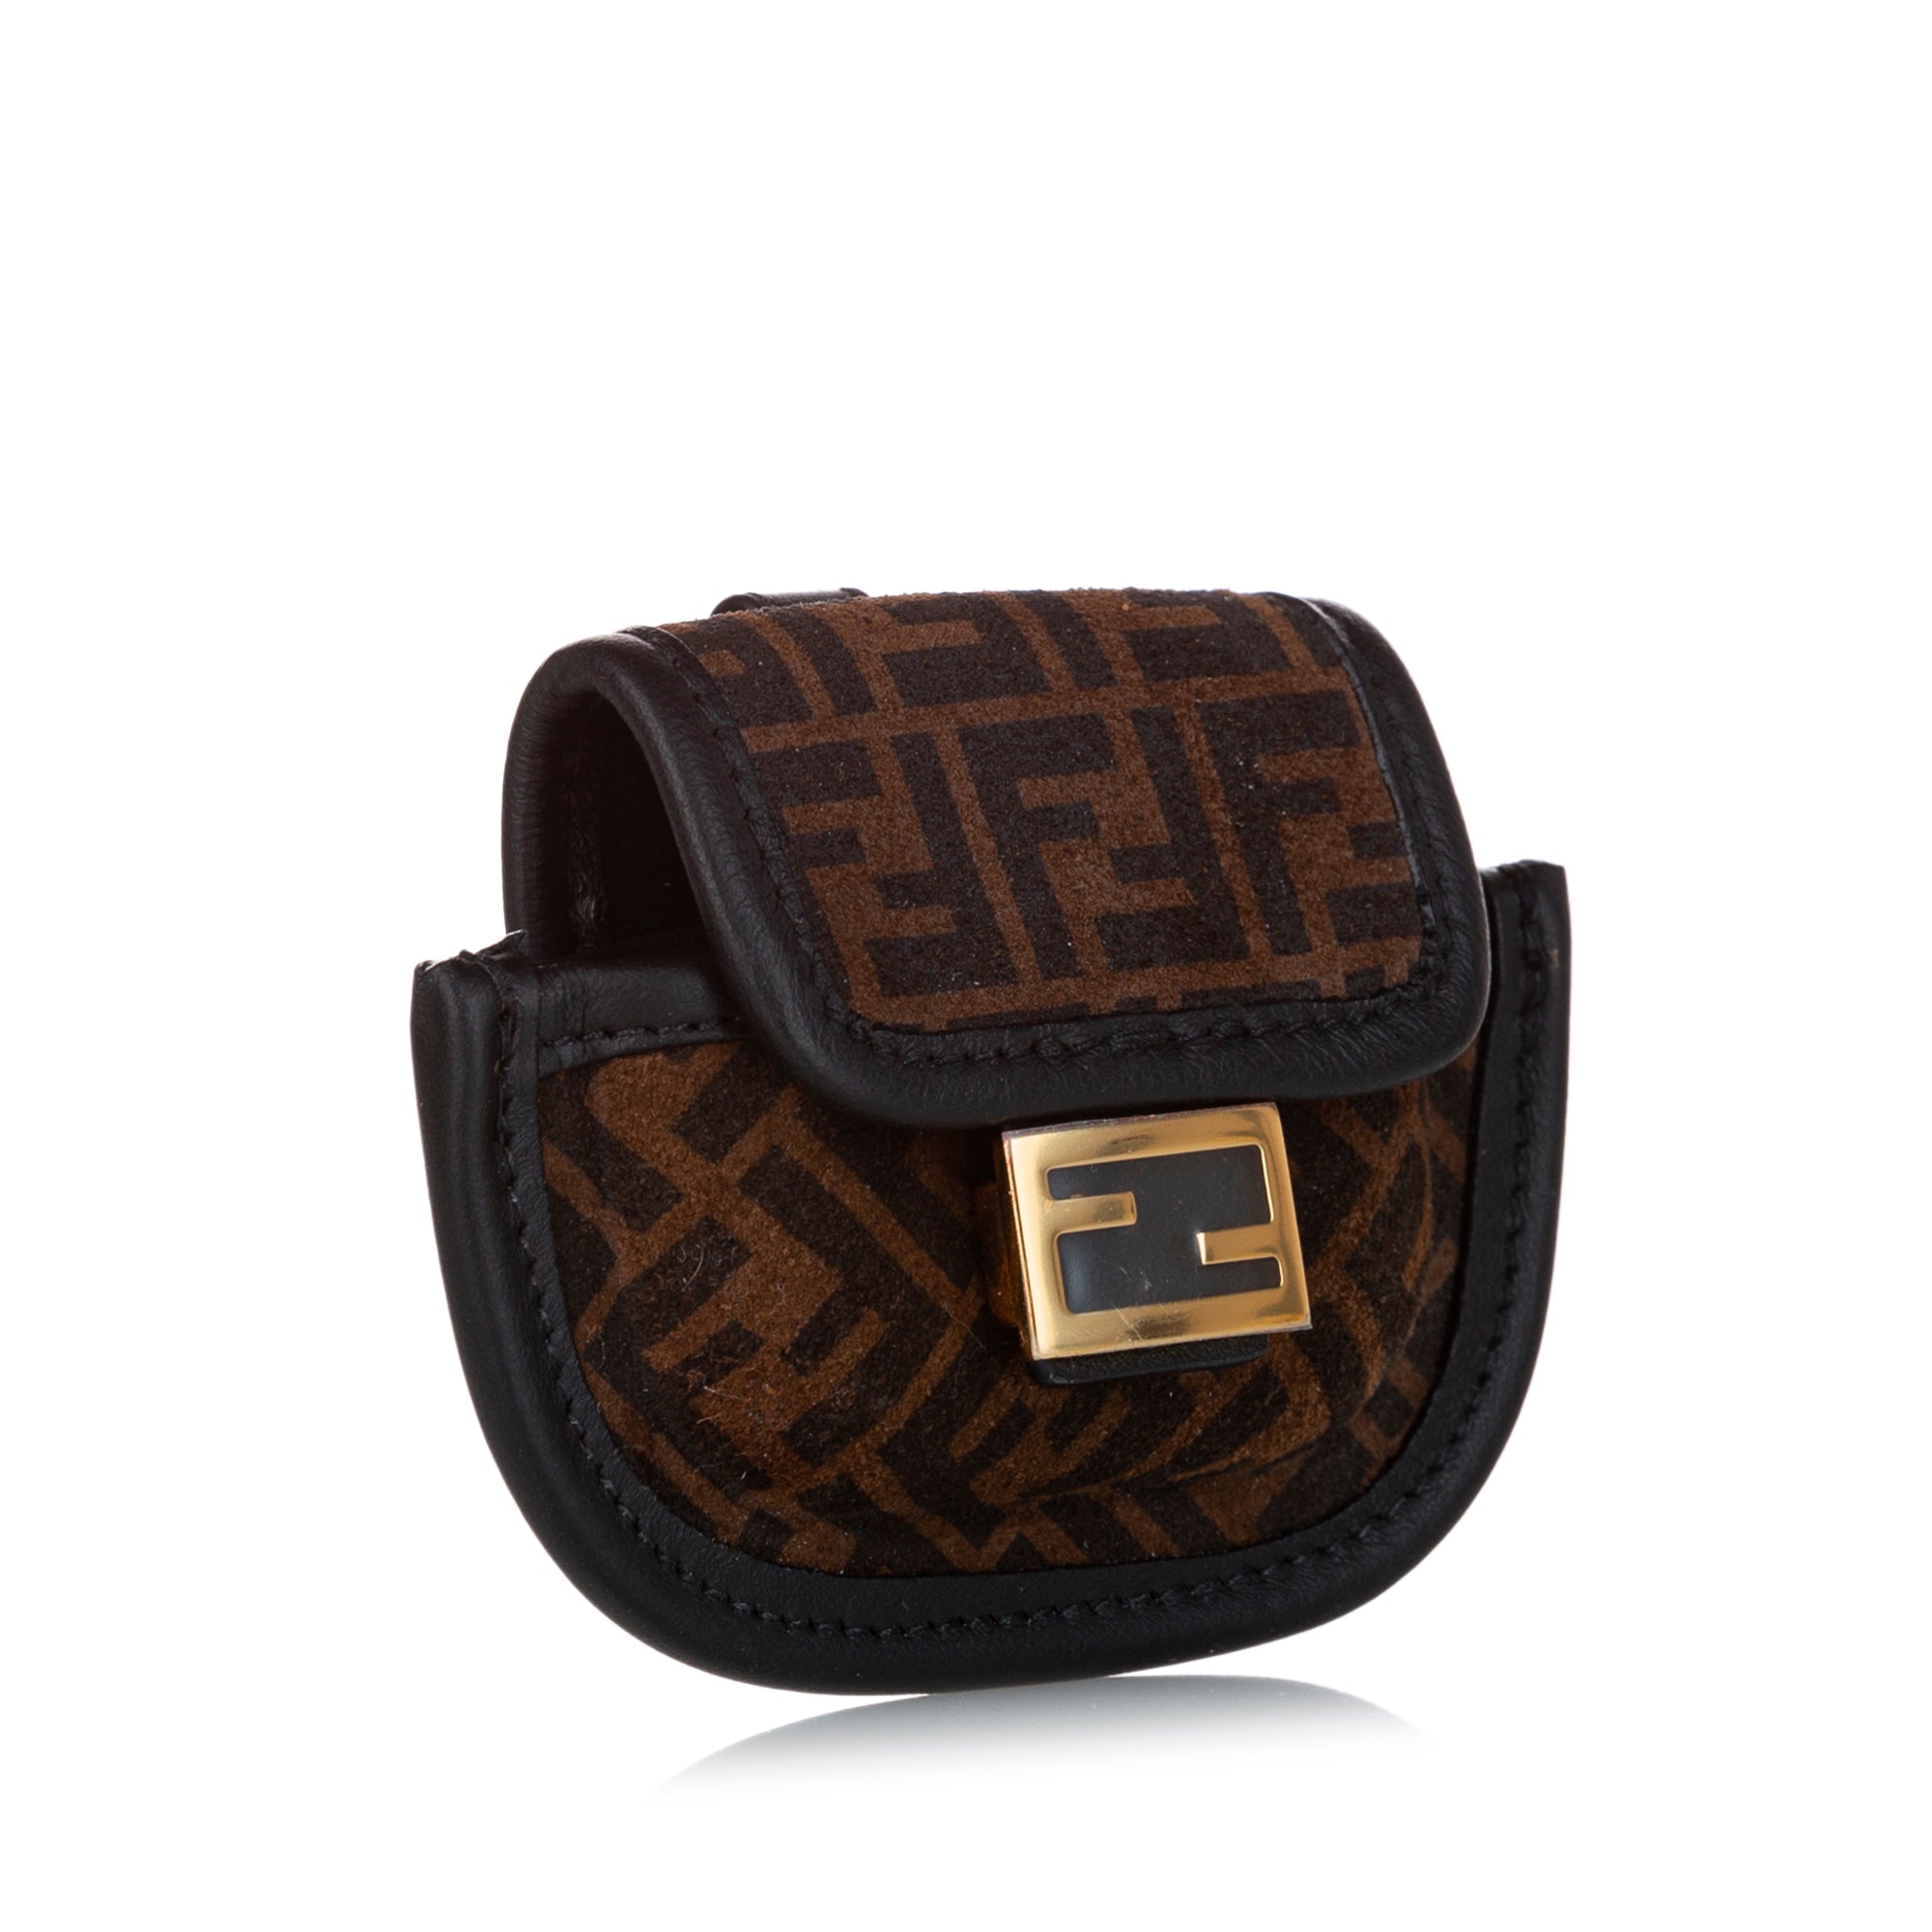 Zucca Pico Baguette Suede Charm_1